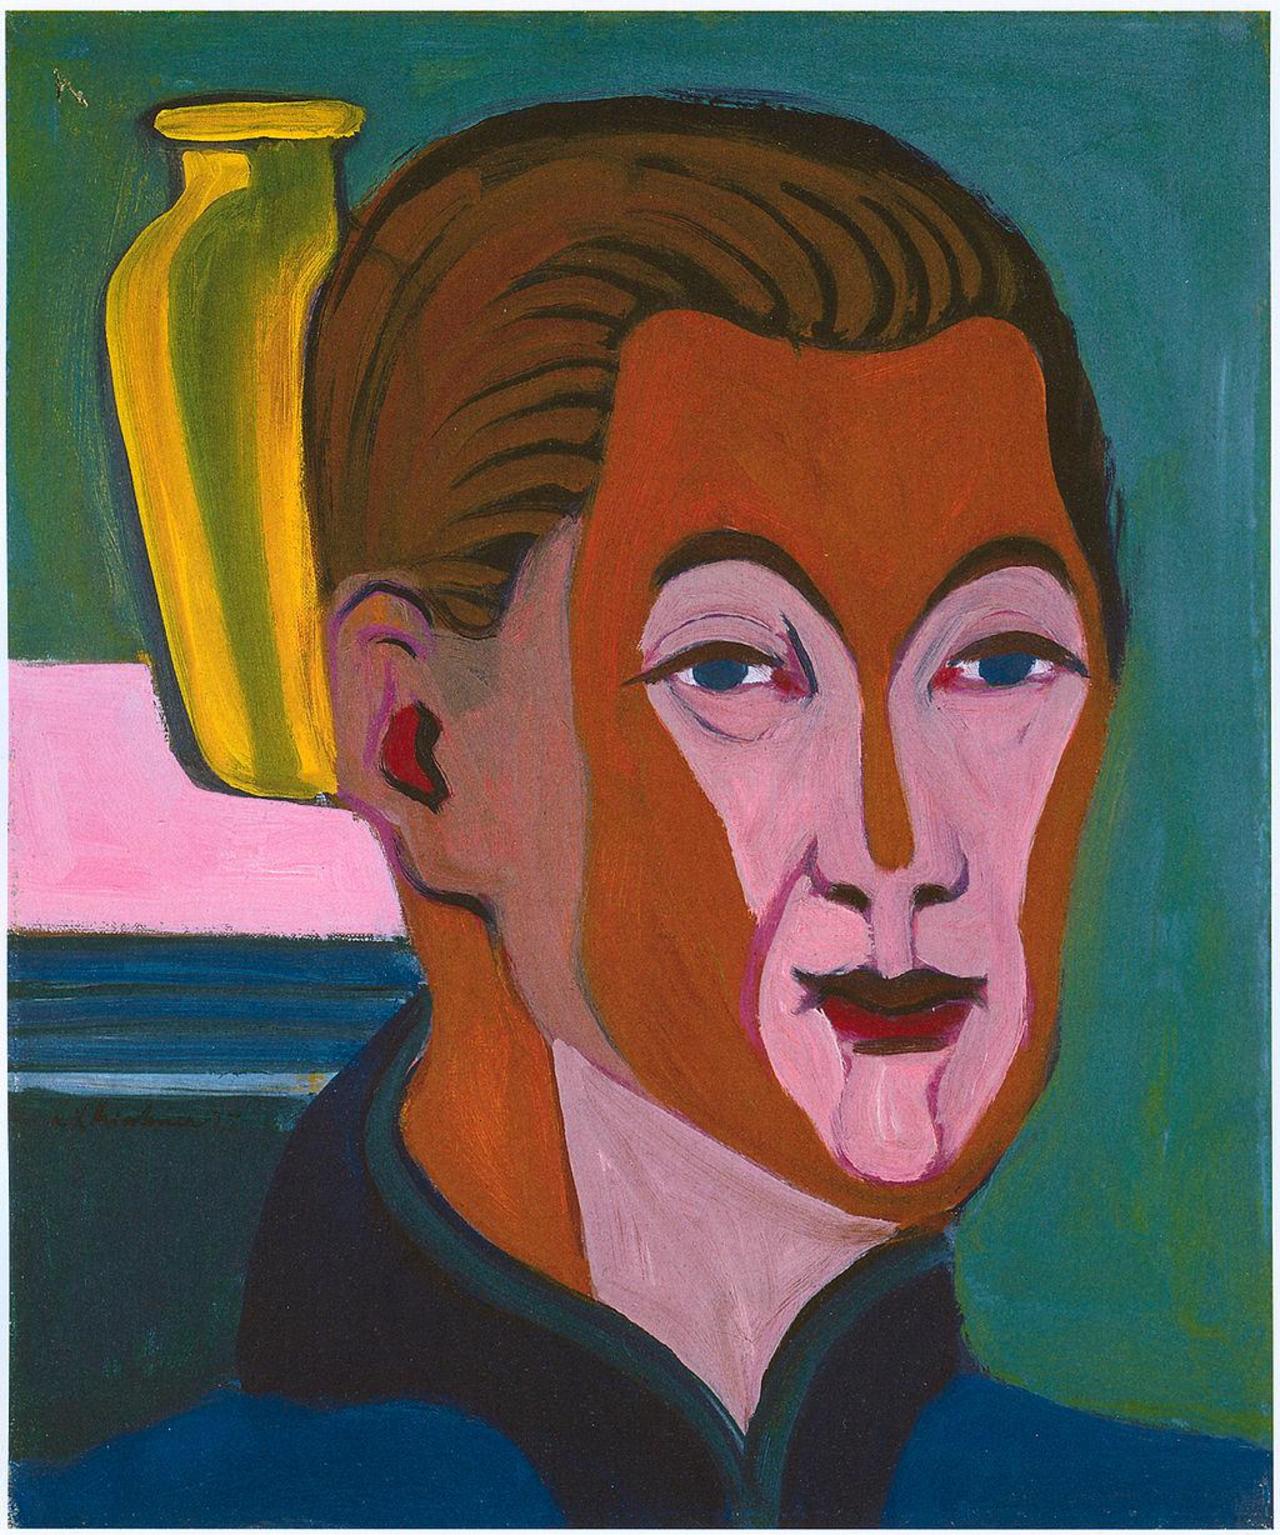 #Artist Ernst Ludwig Kirchner was #bornonthisday in 1880! This is his 'Self portrait', 1925. http://t.co/Rw0OfID9Uo